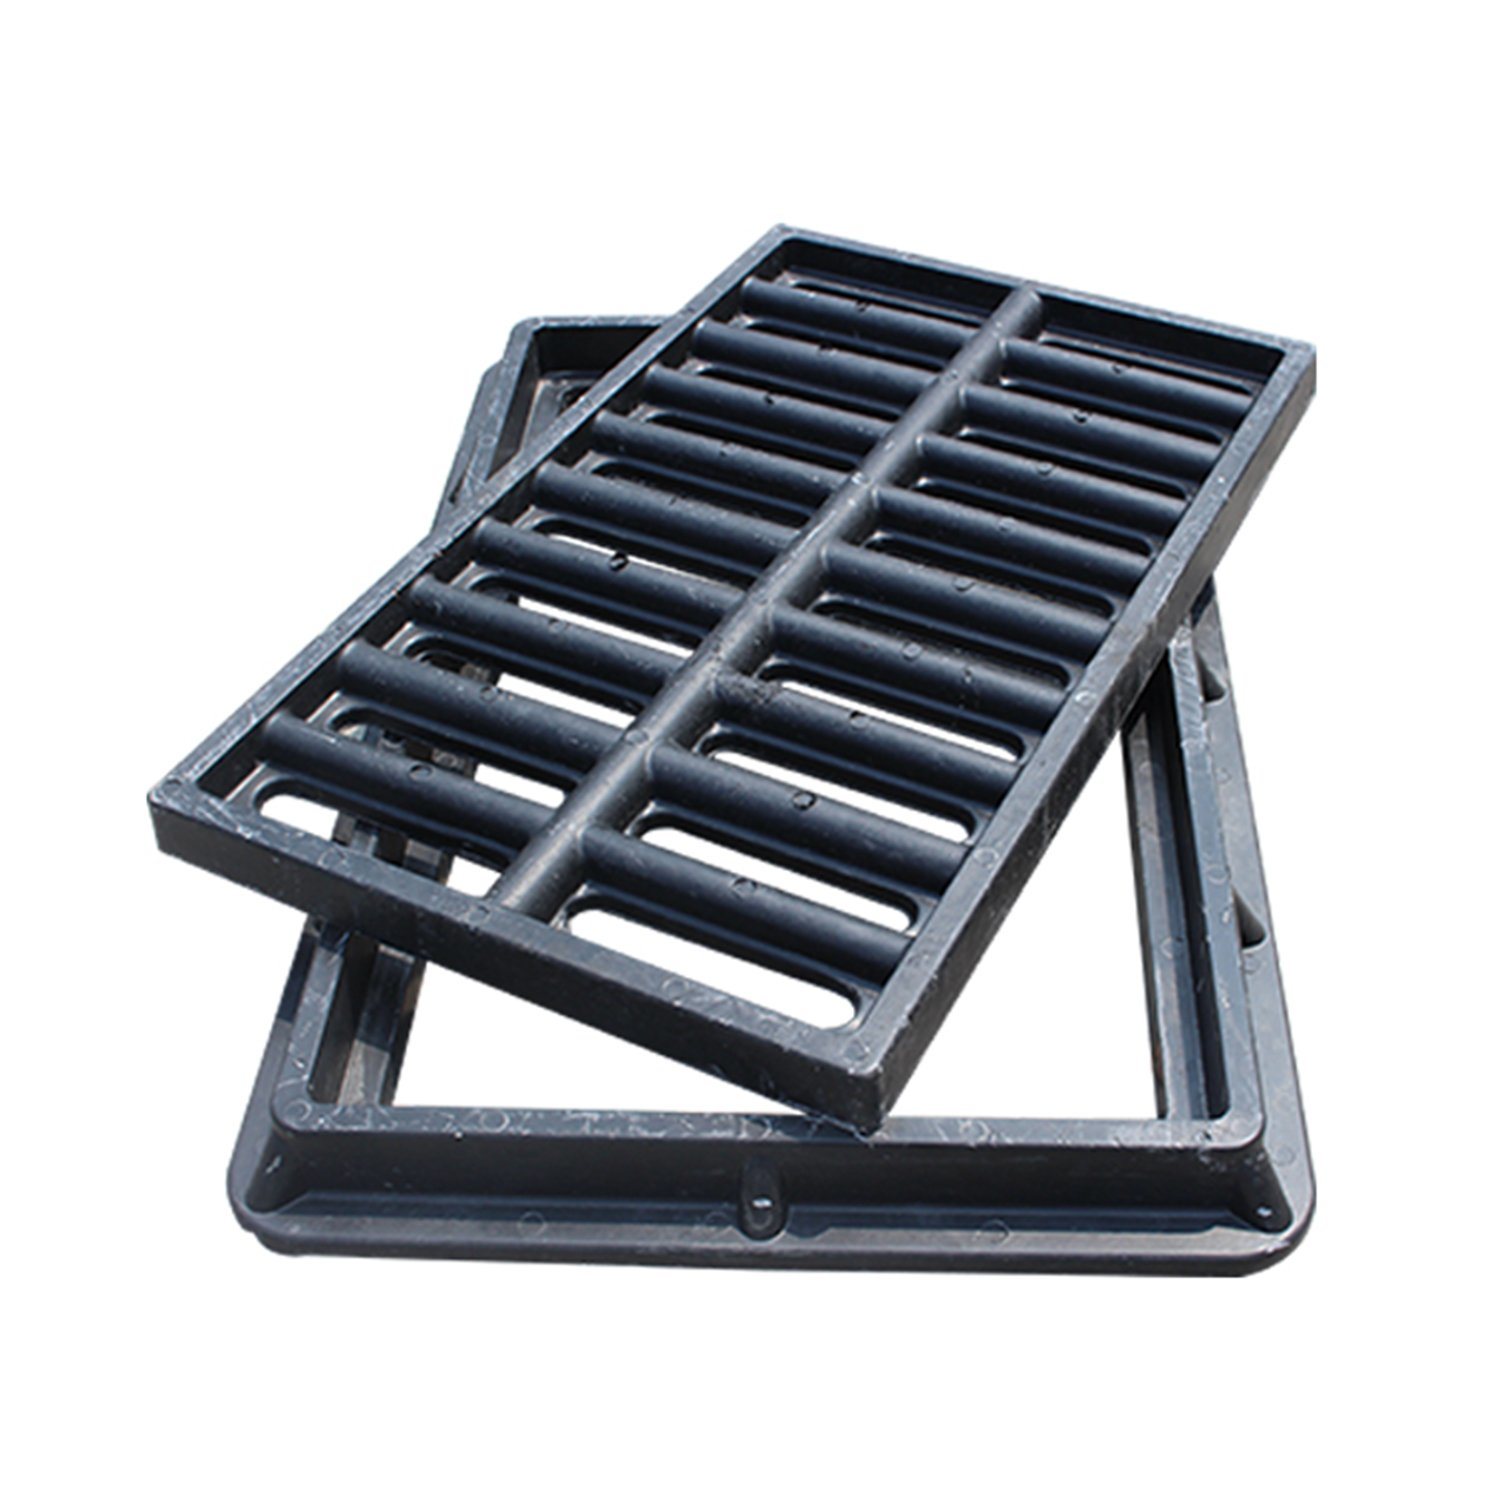 Outdoor Drainage Grate Trench Driveway Cast Iron Drain Cover Gully Grates Itinatampok na Larawan